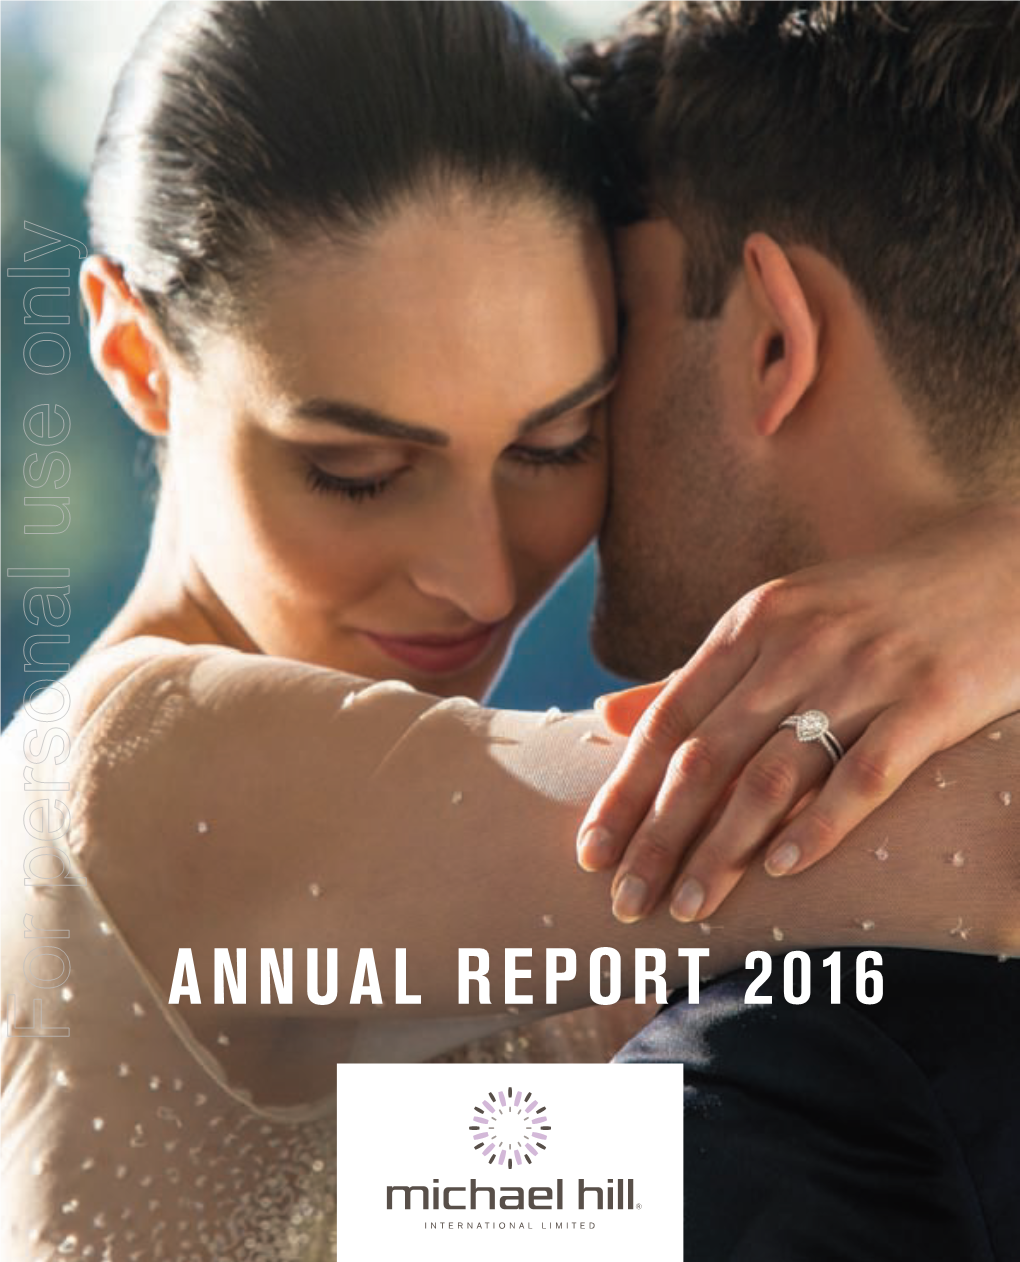 Michael Hill International Limited Annual Report 2016